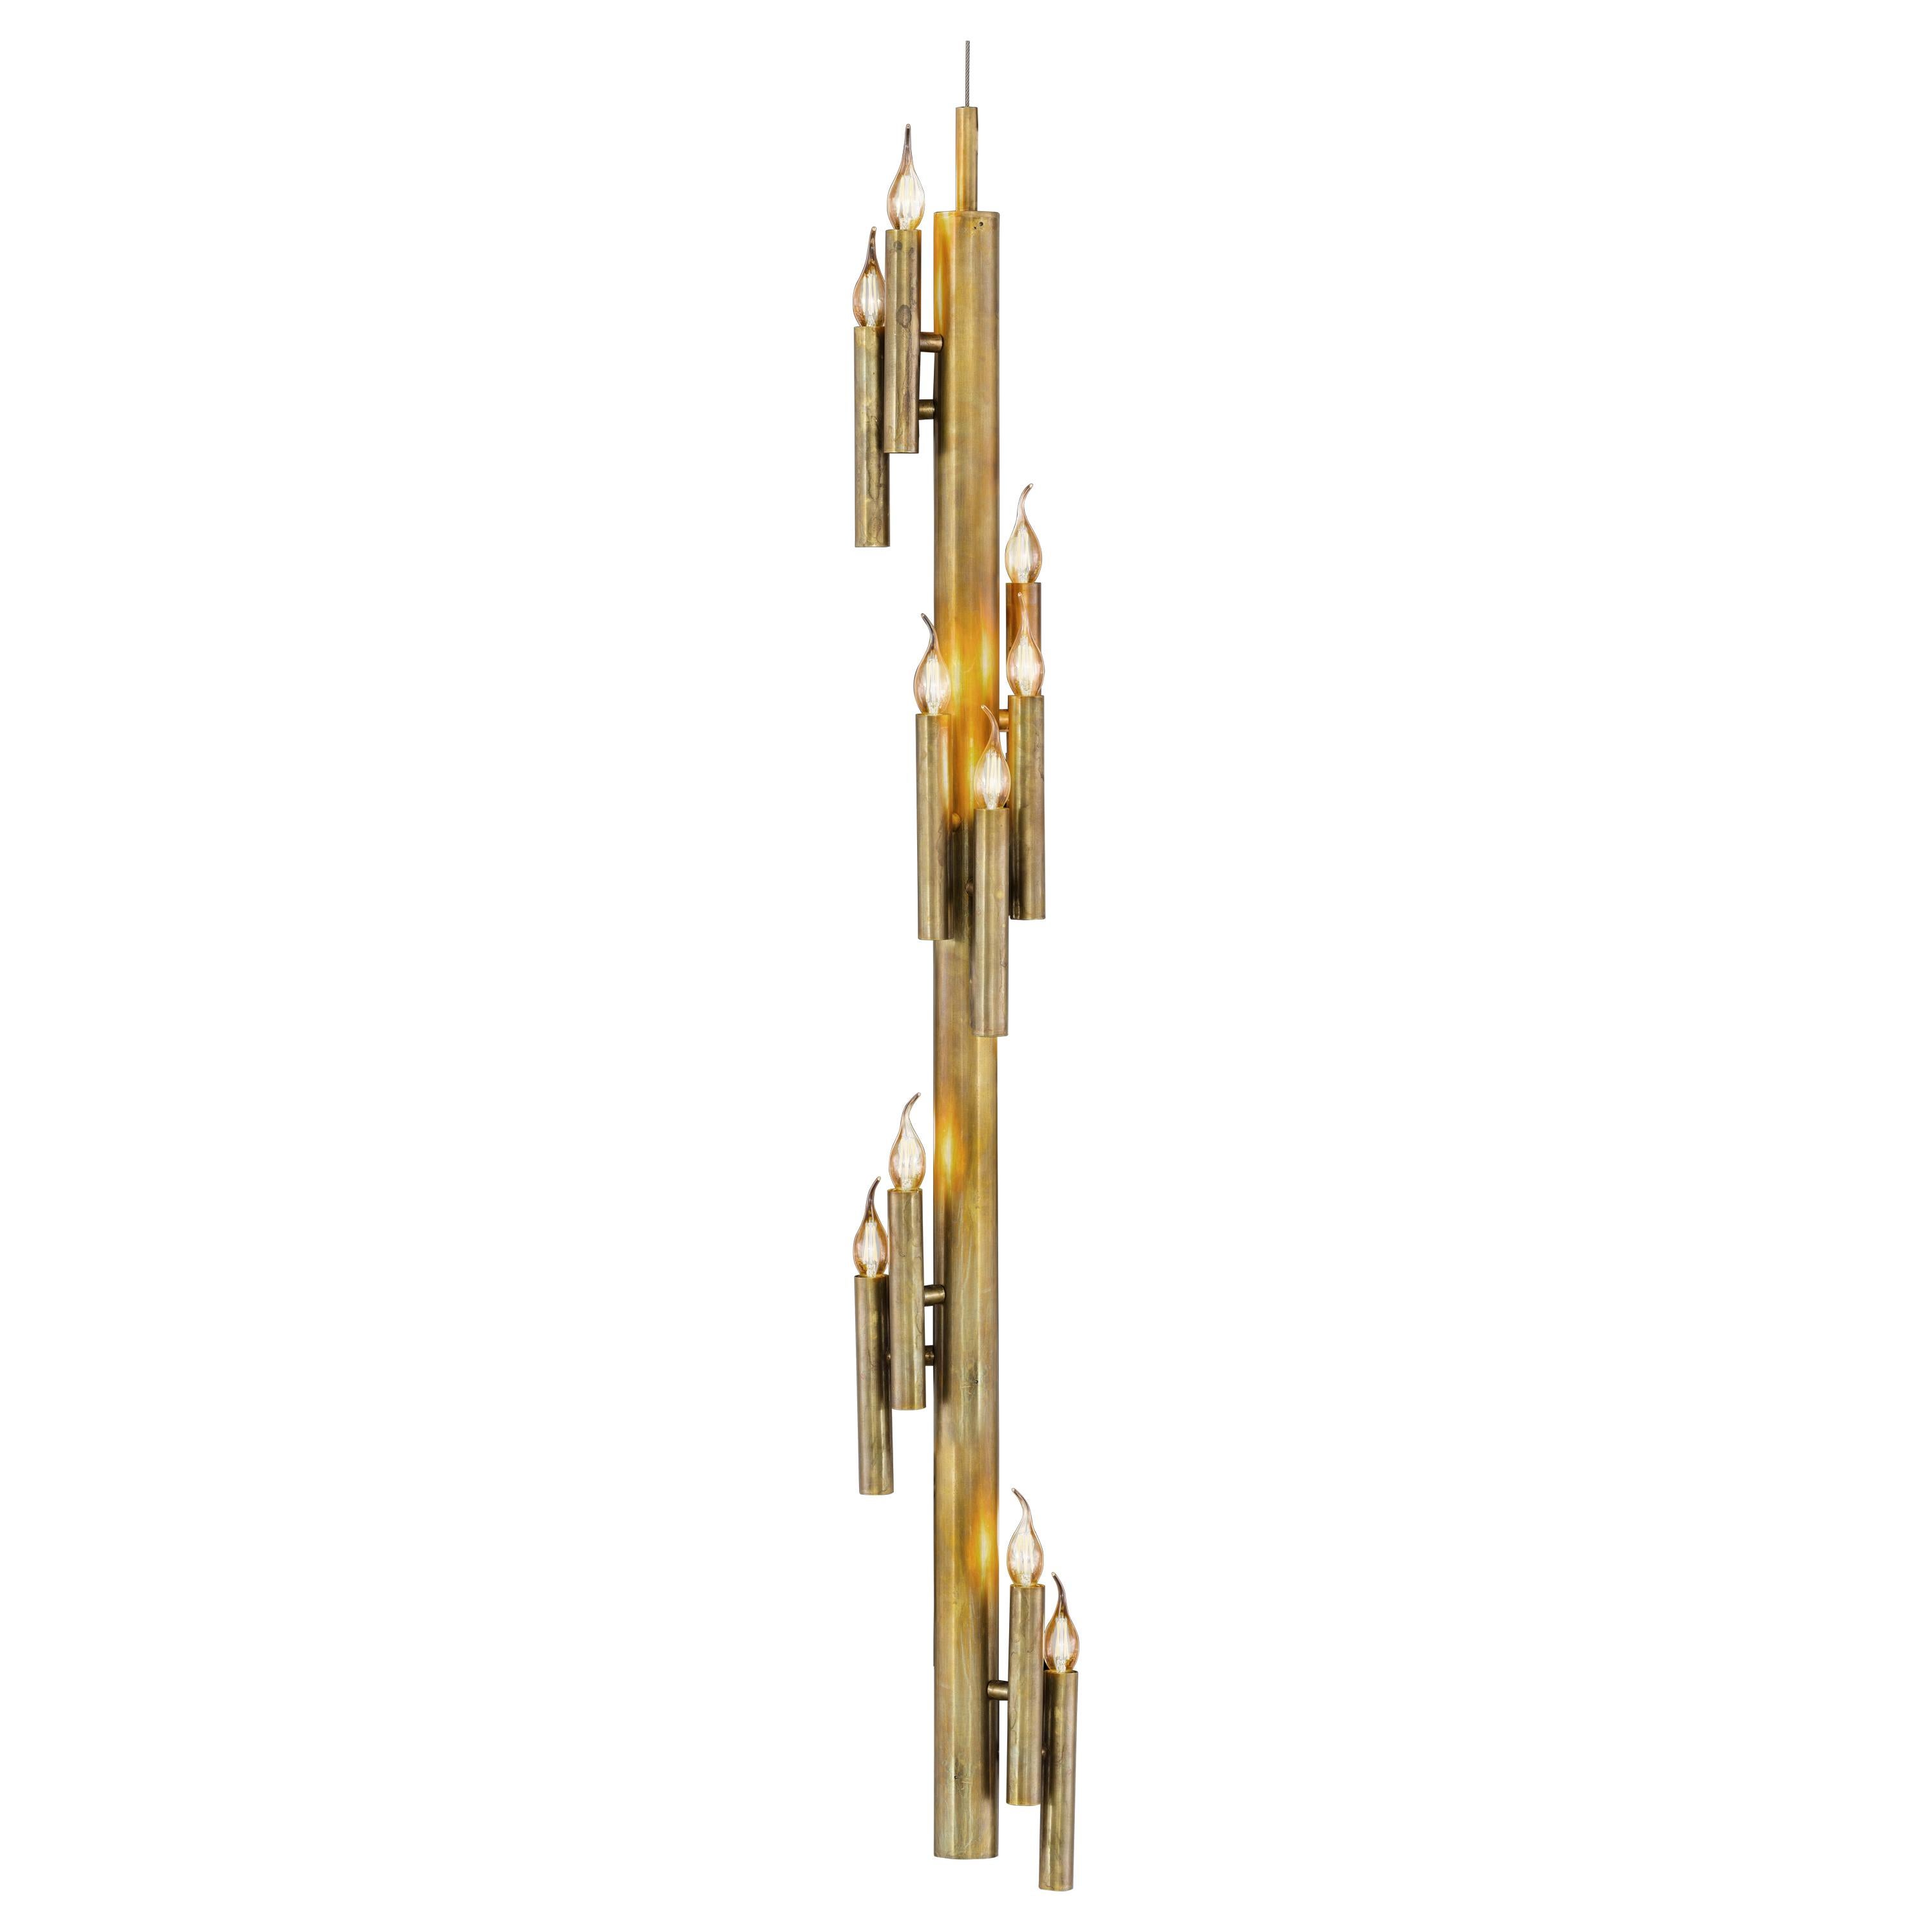 Modern Pendant in a Brass Burnished Finish, Shiro Collection, by Brand Van For Sale